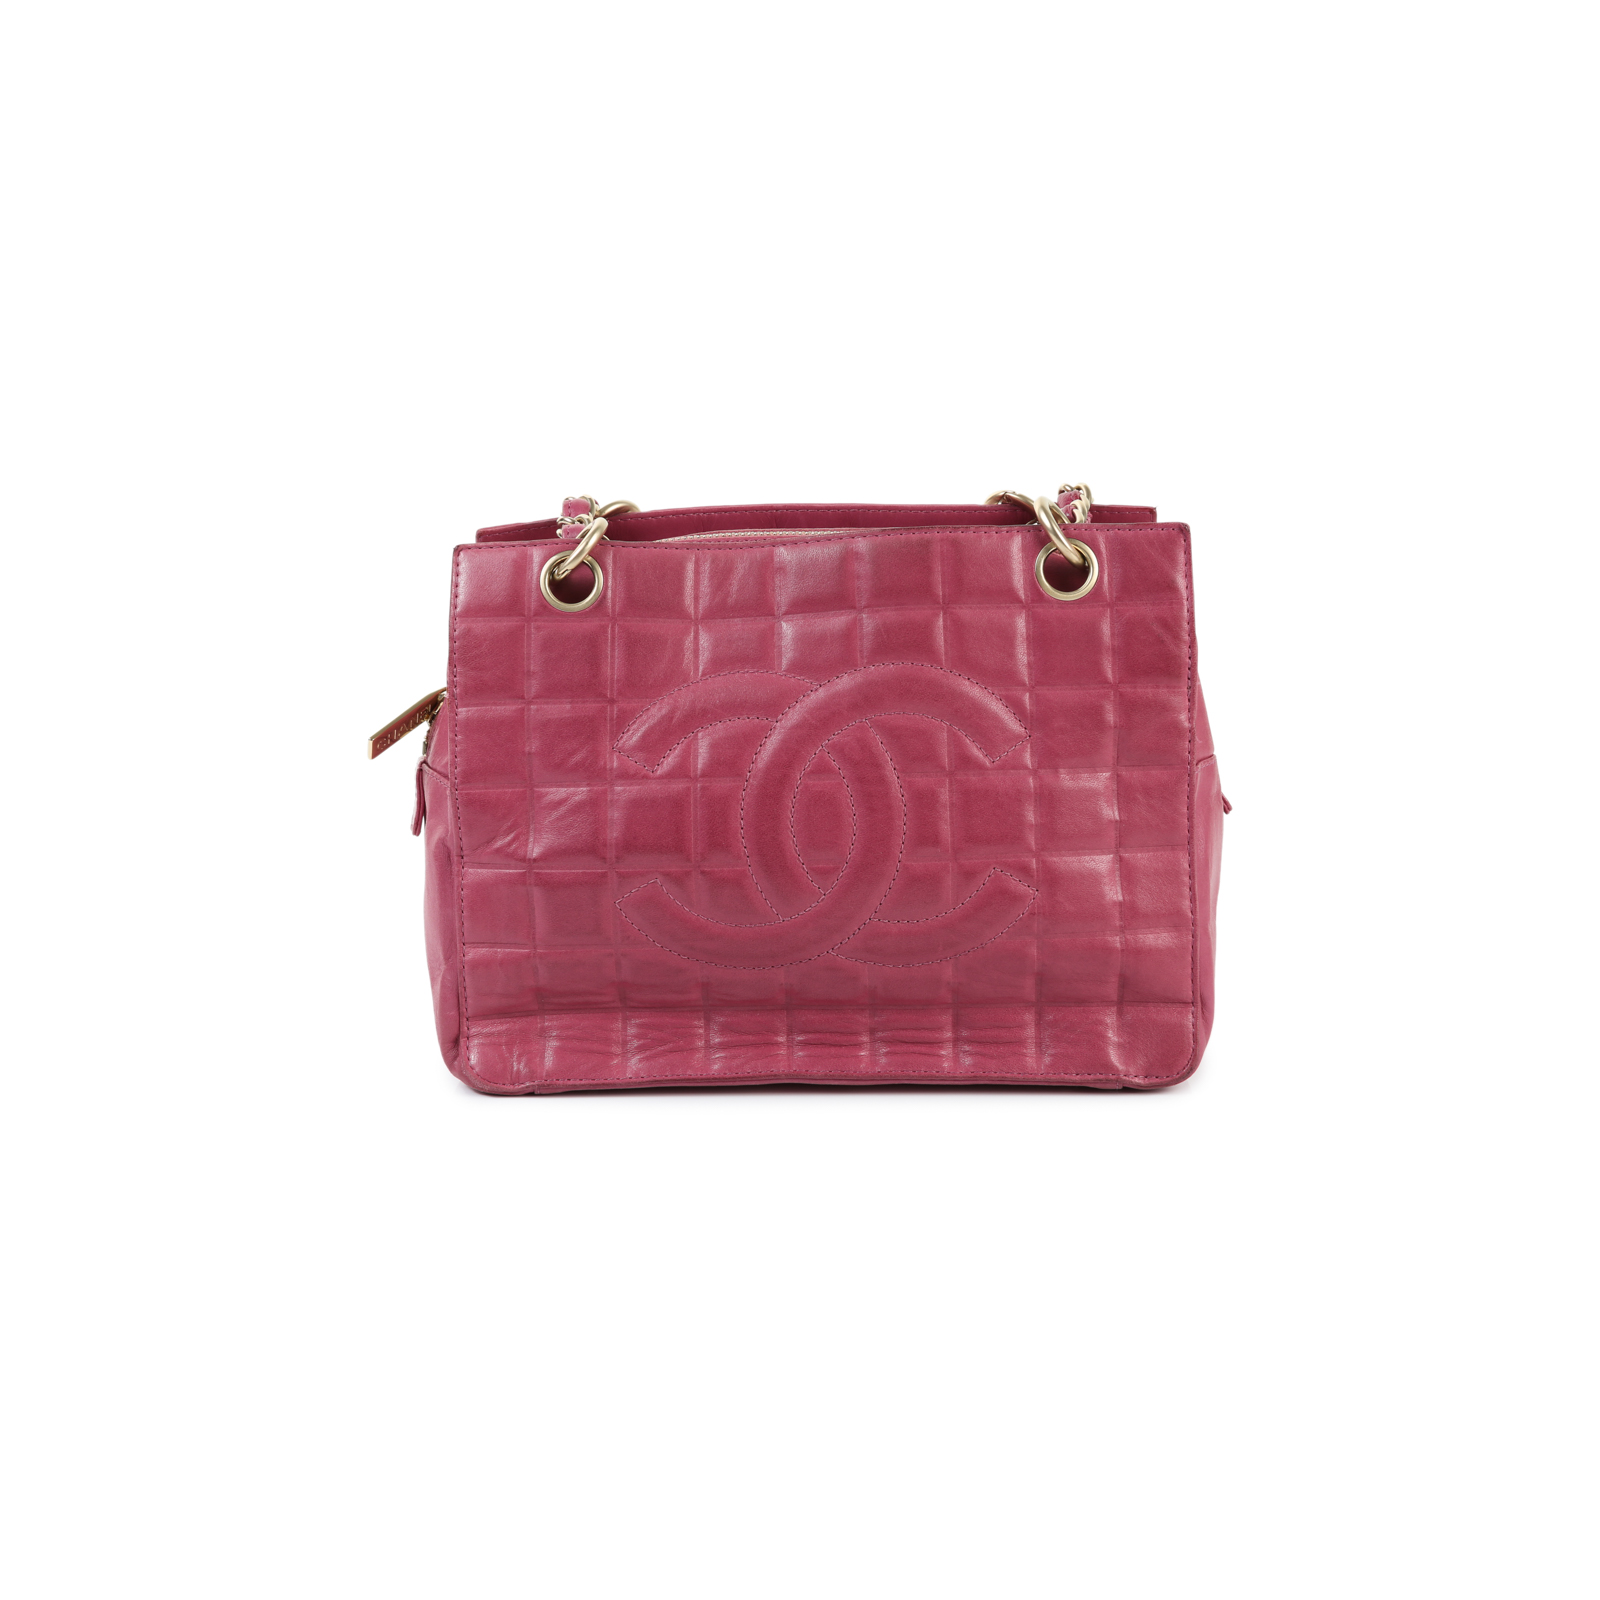 Fushia Petite Timeless Quilted Tote by Chanel - Le Dressing Monaco